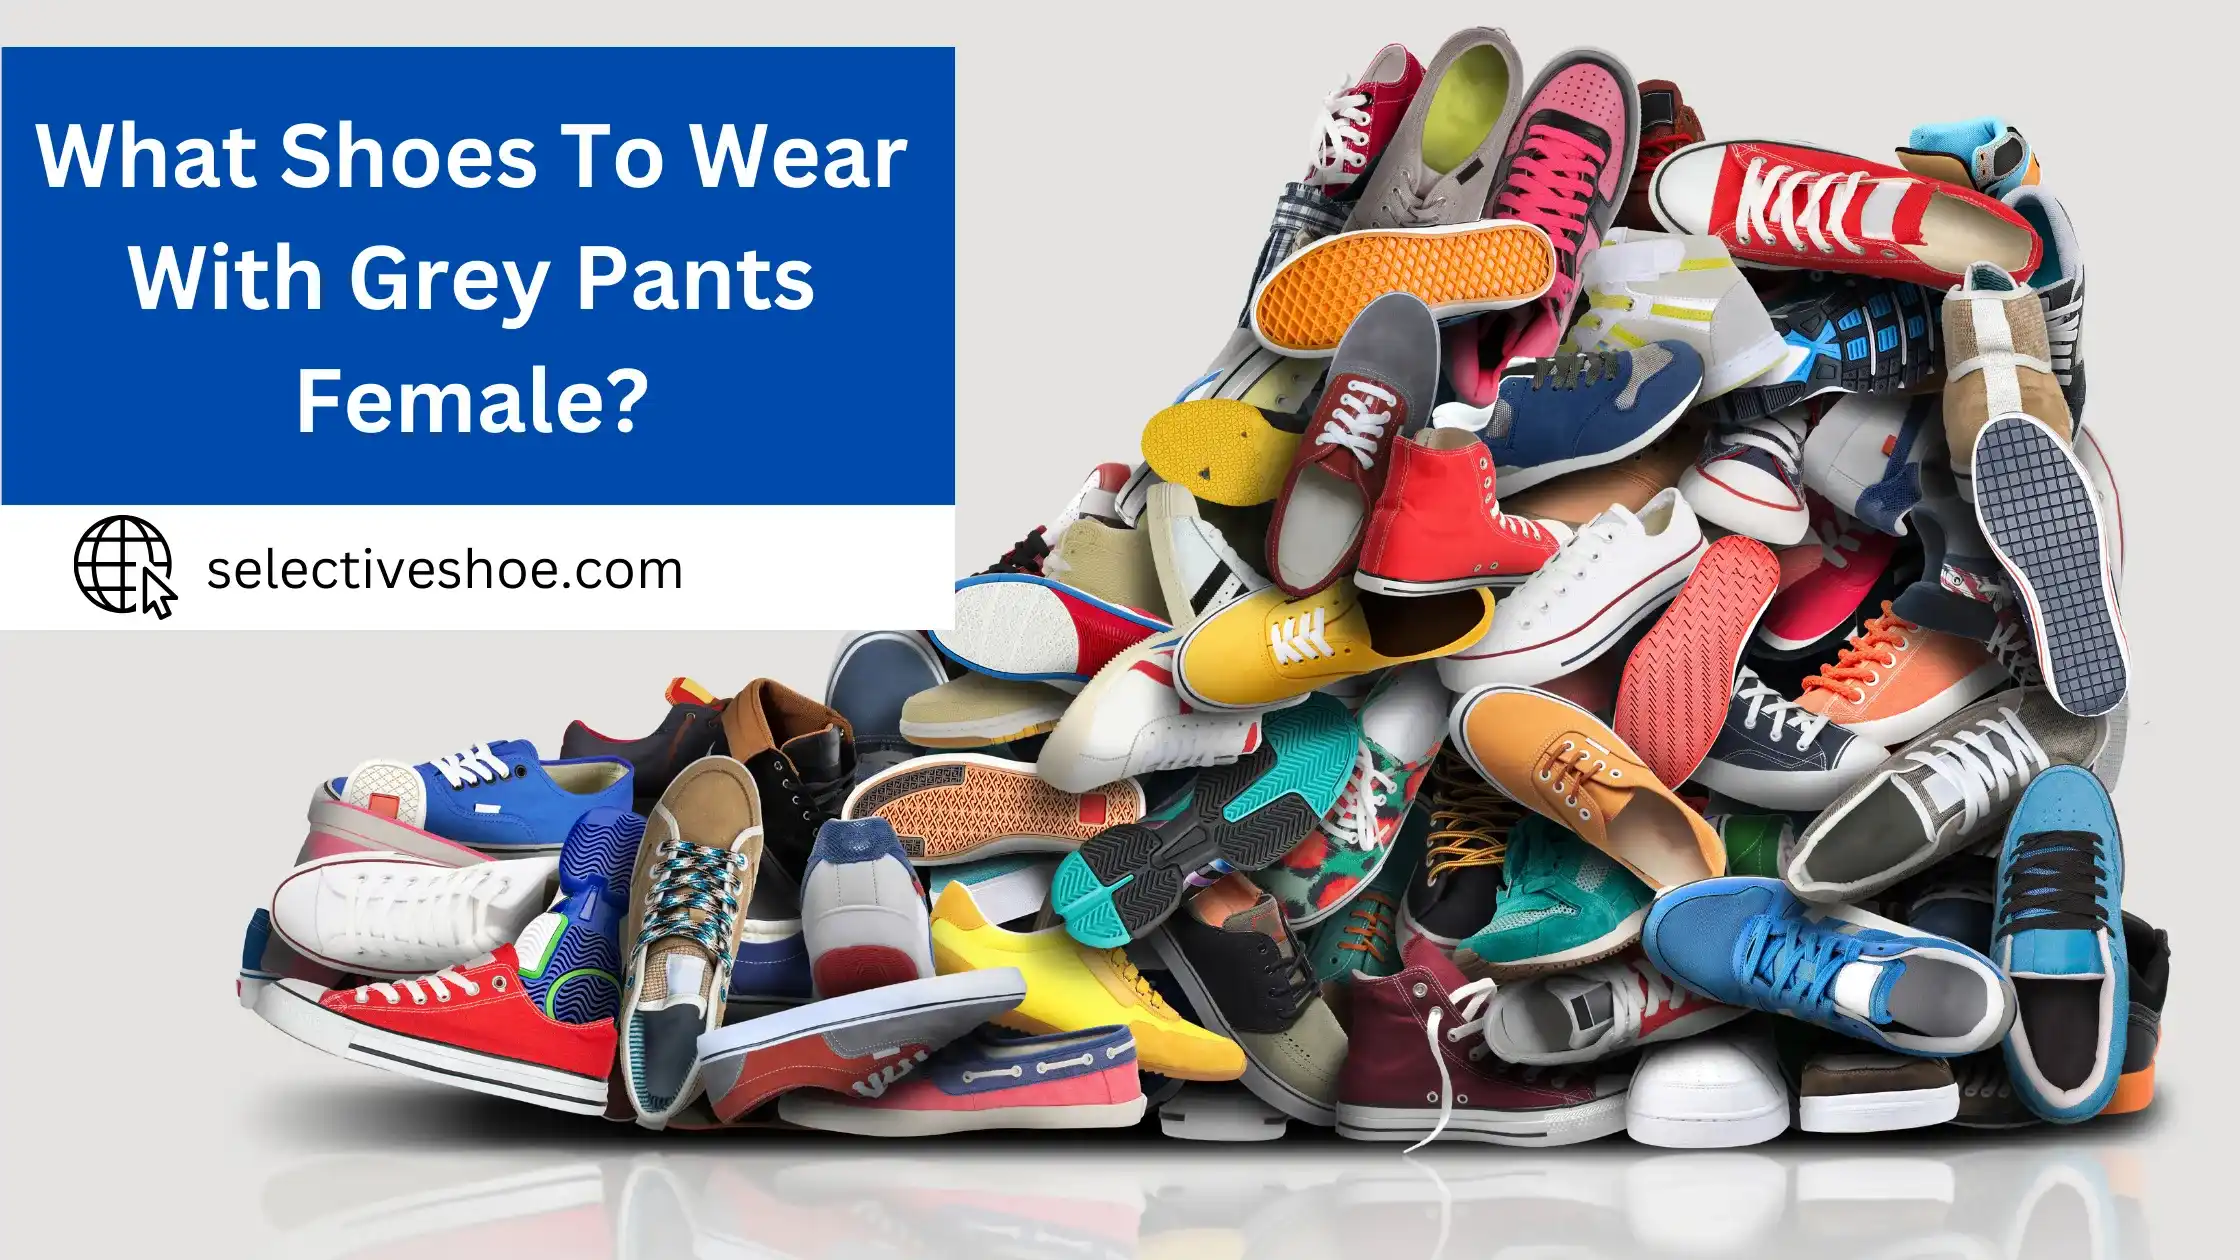 What Shoes To Wear With Grey Pants Female? Best Explained